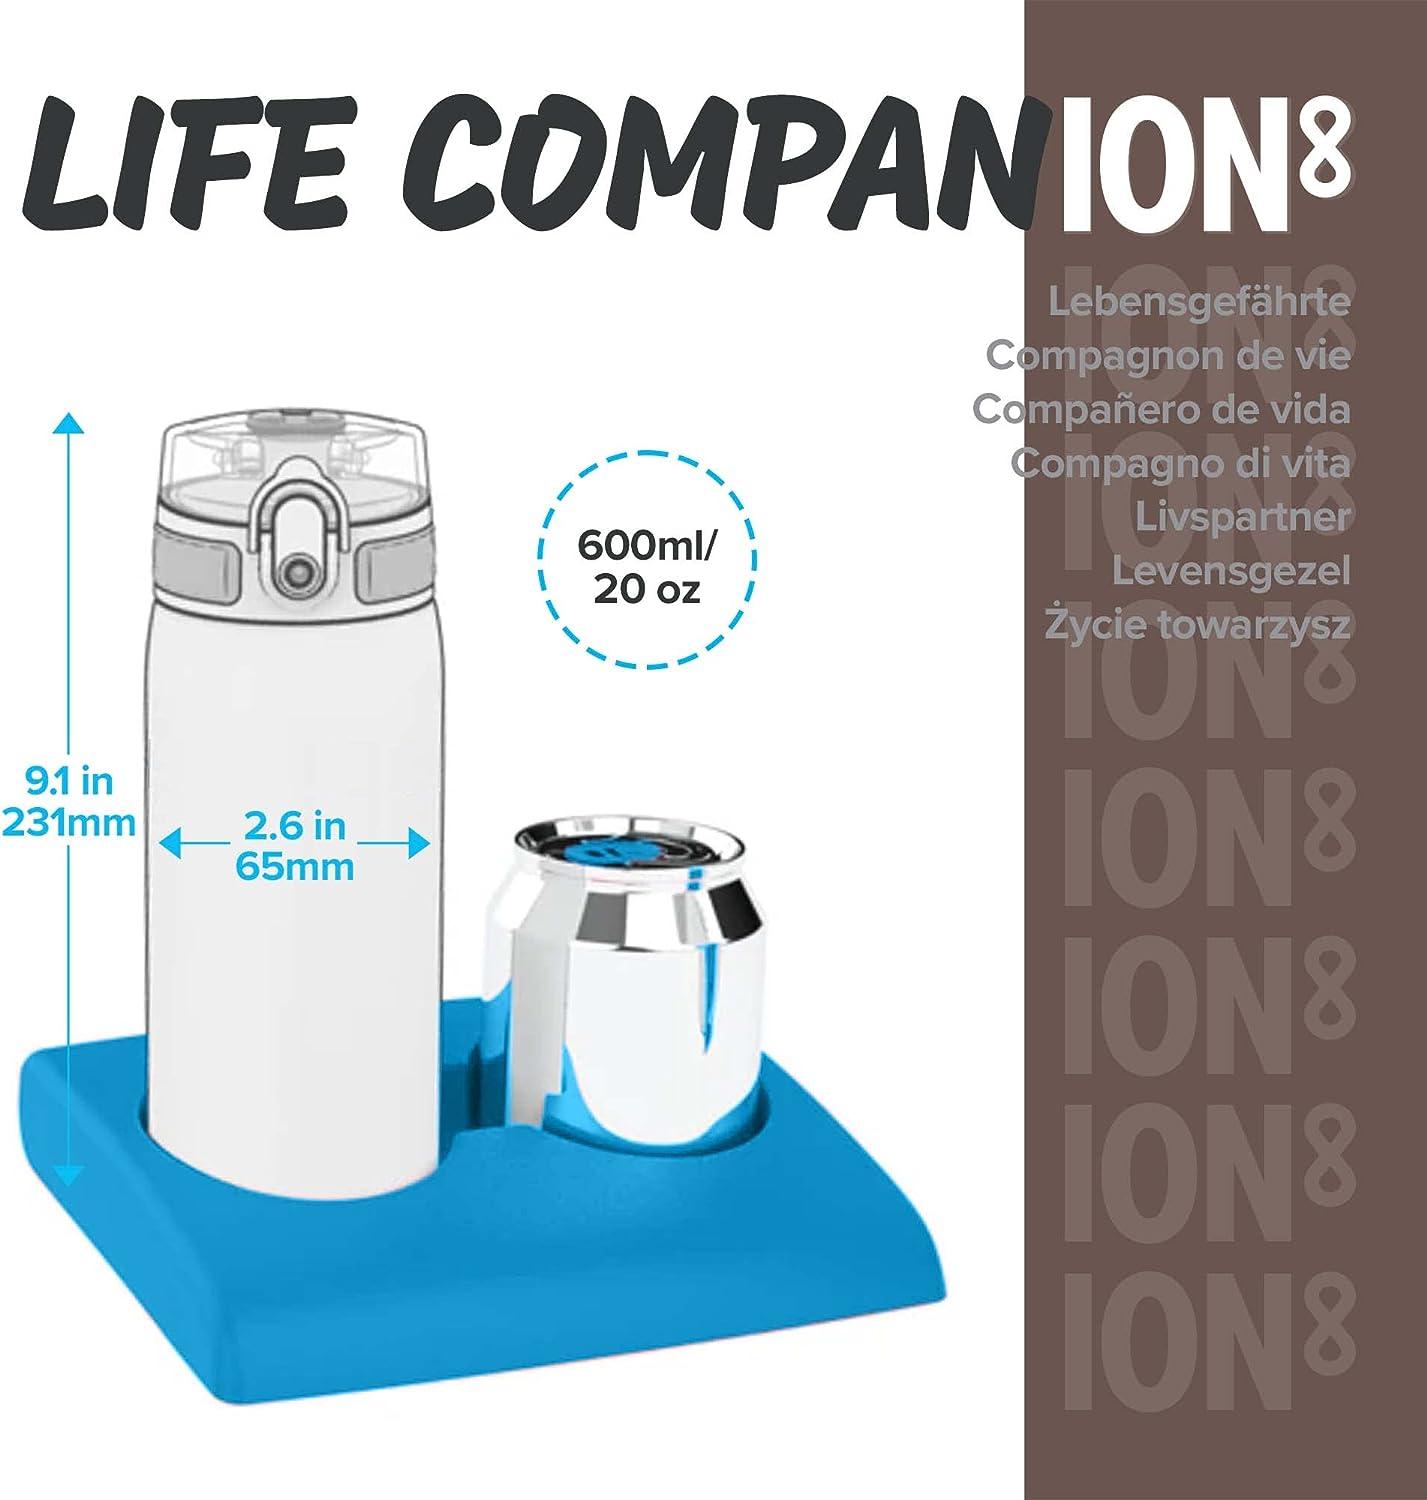 What I Love About The Ion8 Kids Water Bottle - Counting To Ten